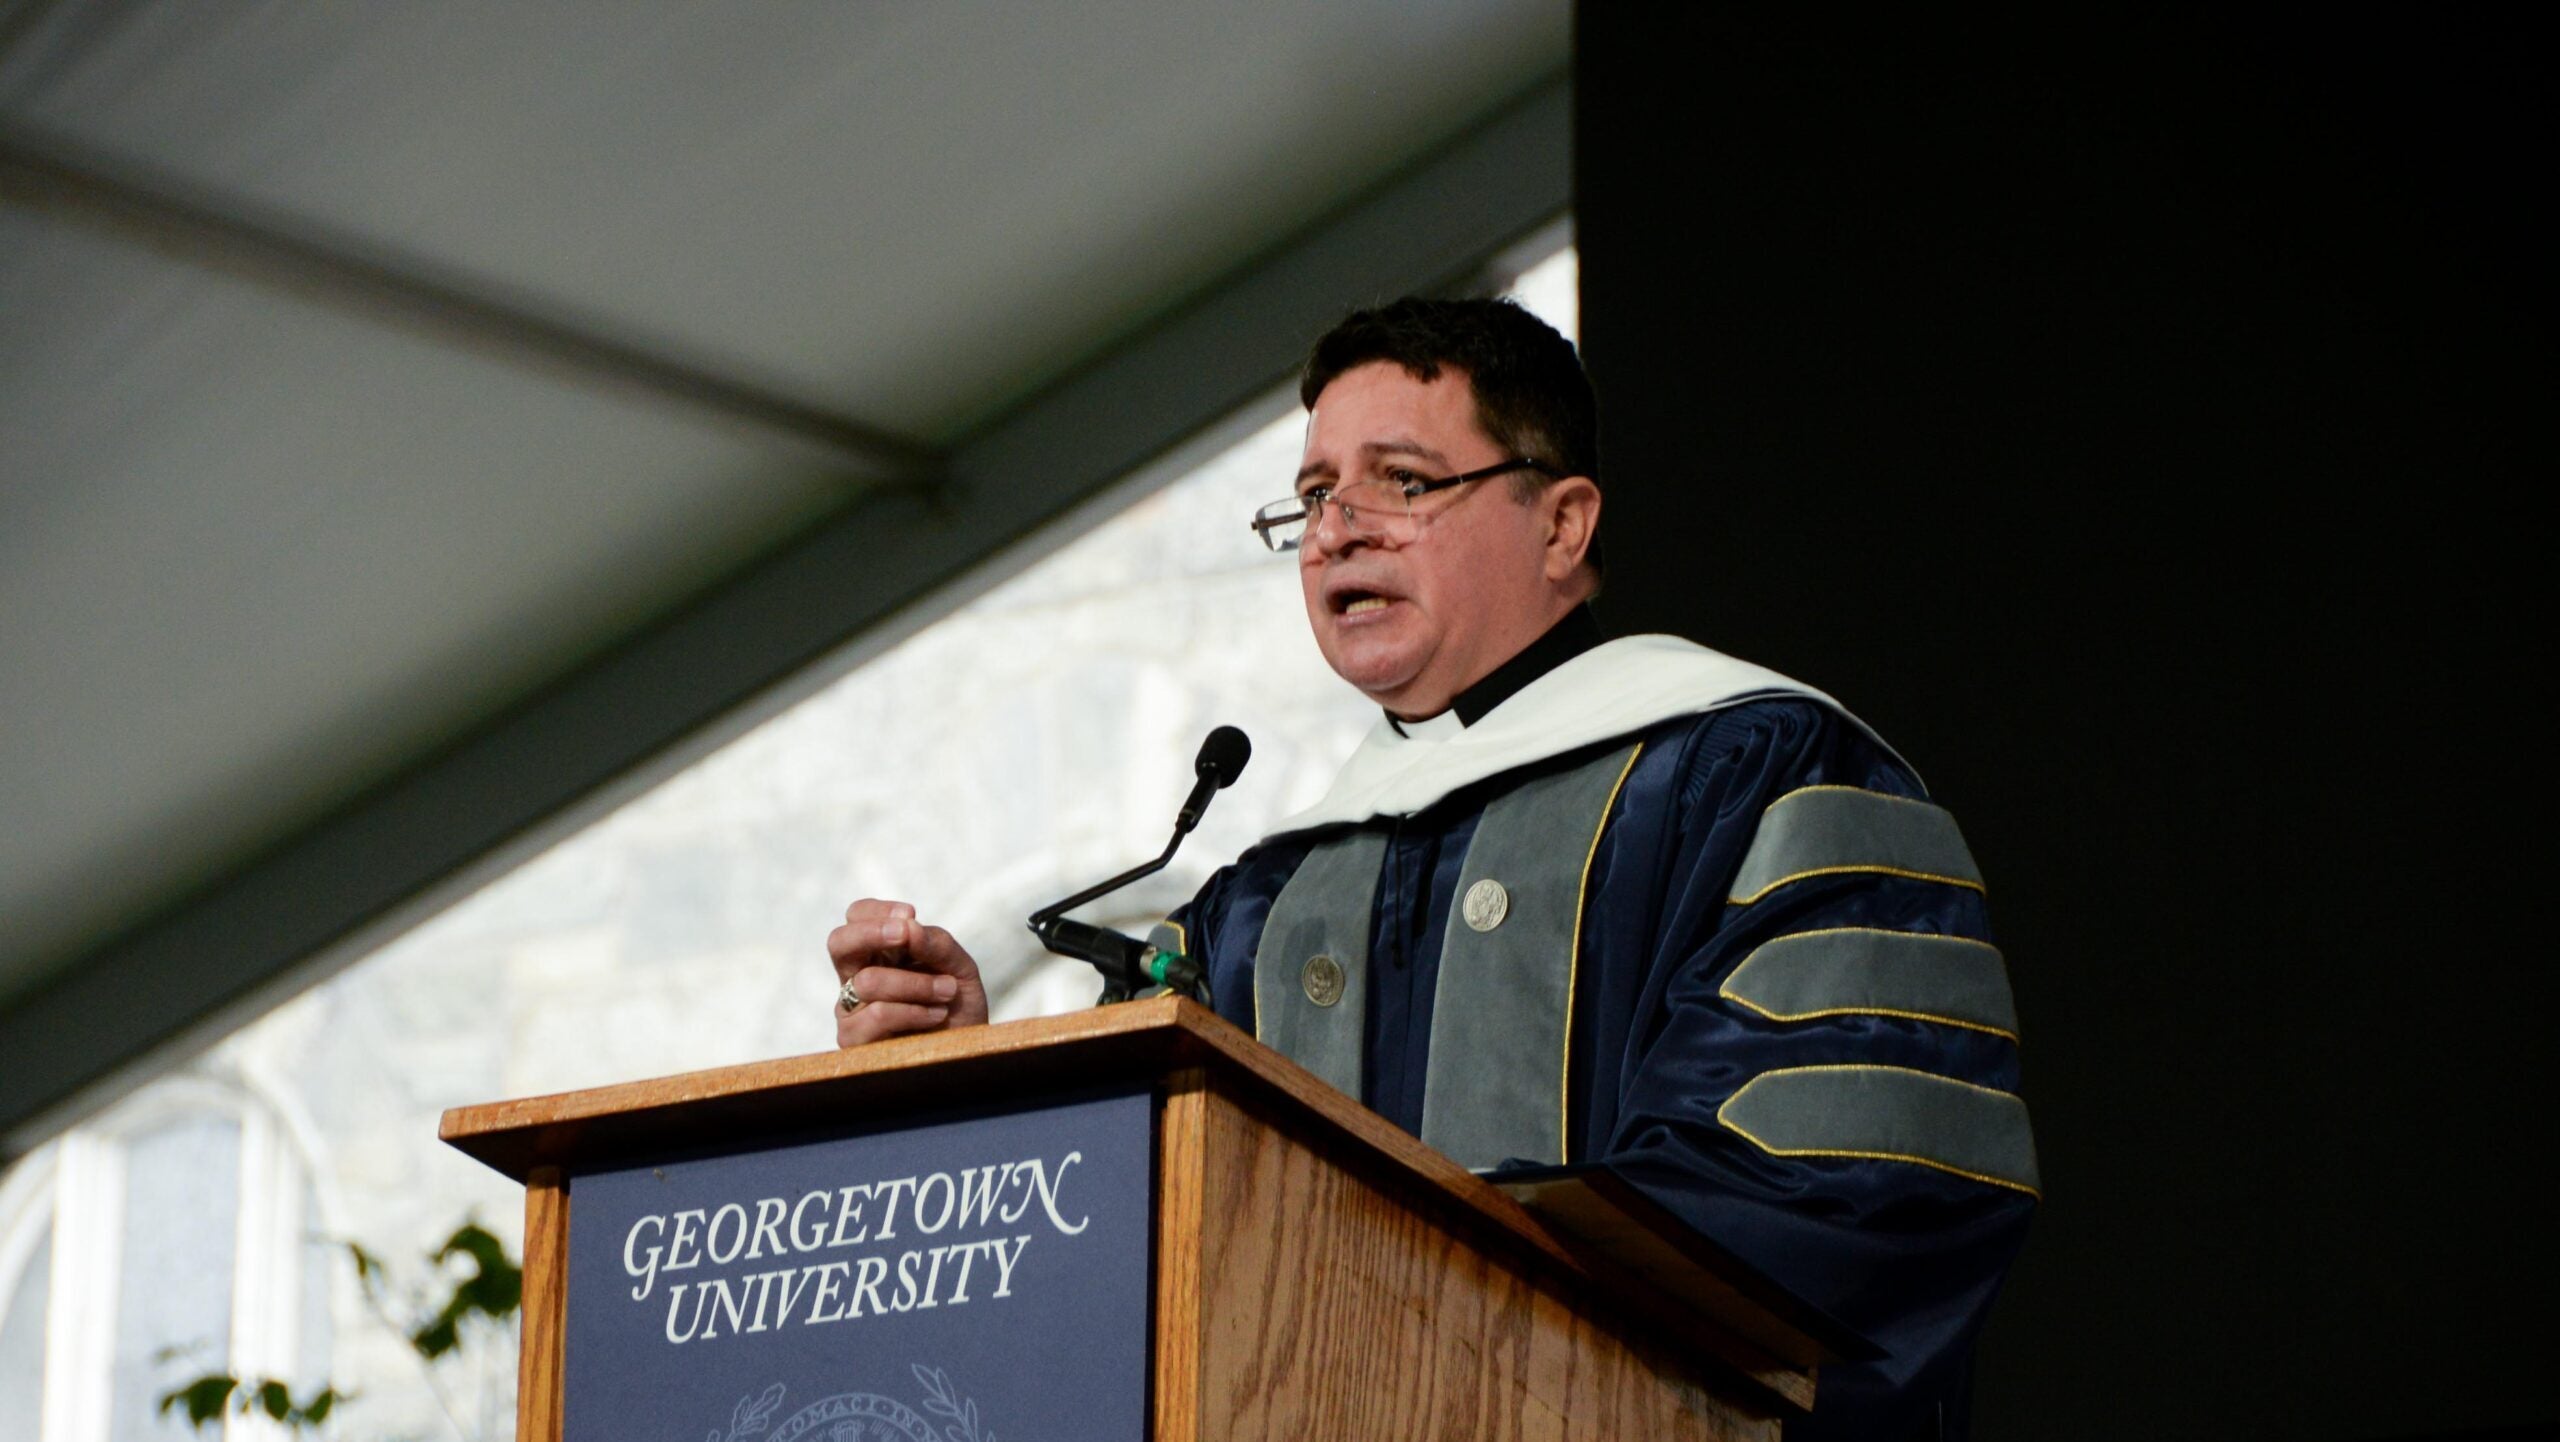 A bespectacled man in blue and gray academic regalia speaks at a lectern.